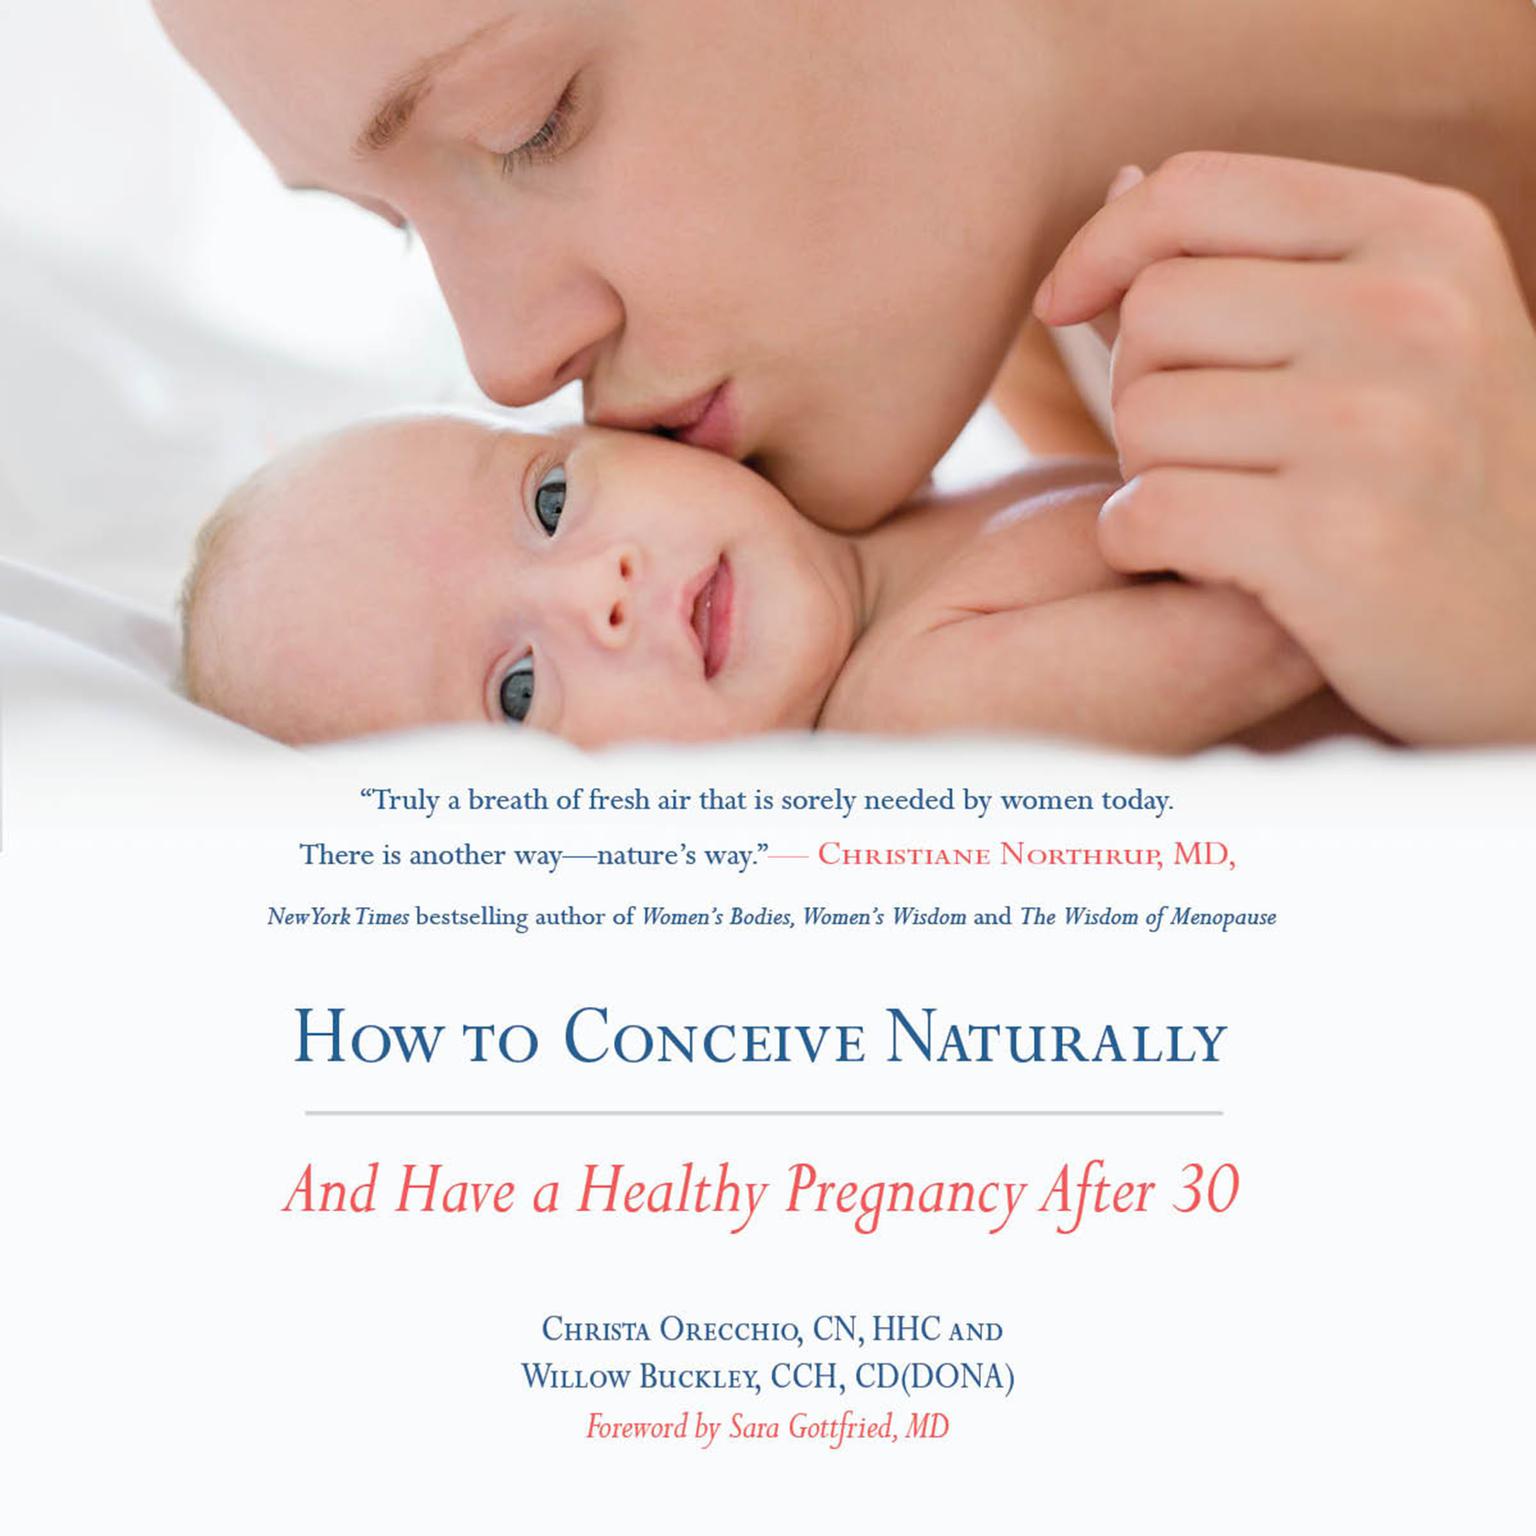 How to Conceive Naturally: And Have a Healthy Pregnancy after 30 Audiobook, by Christa Orecchio